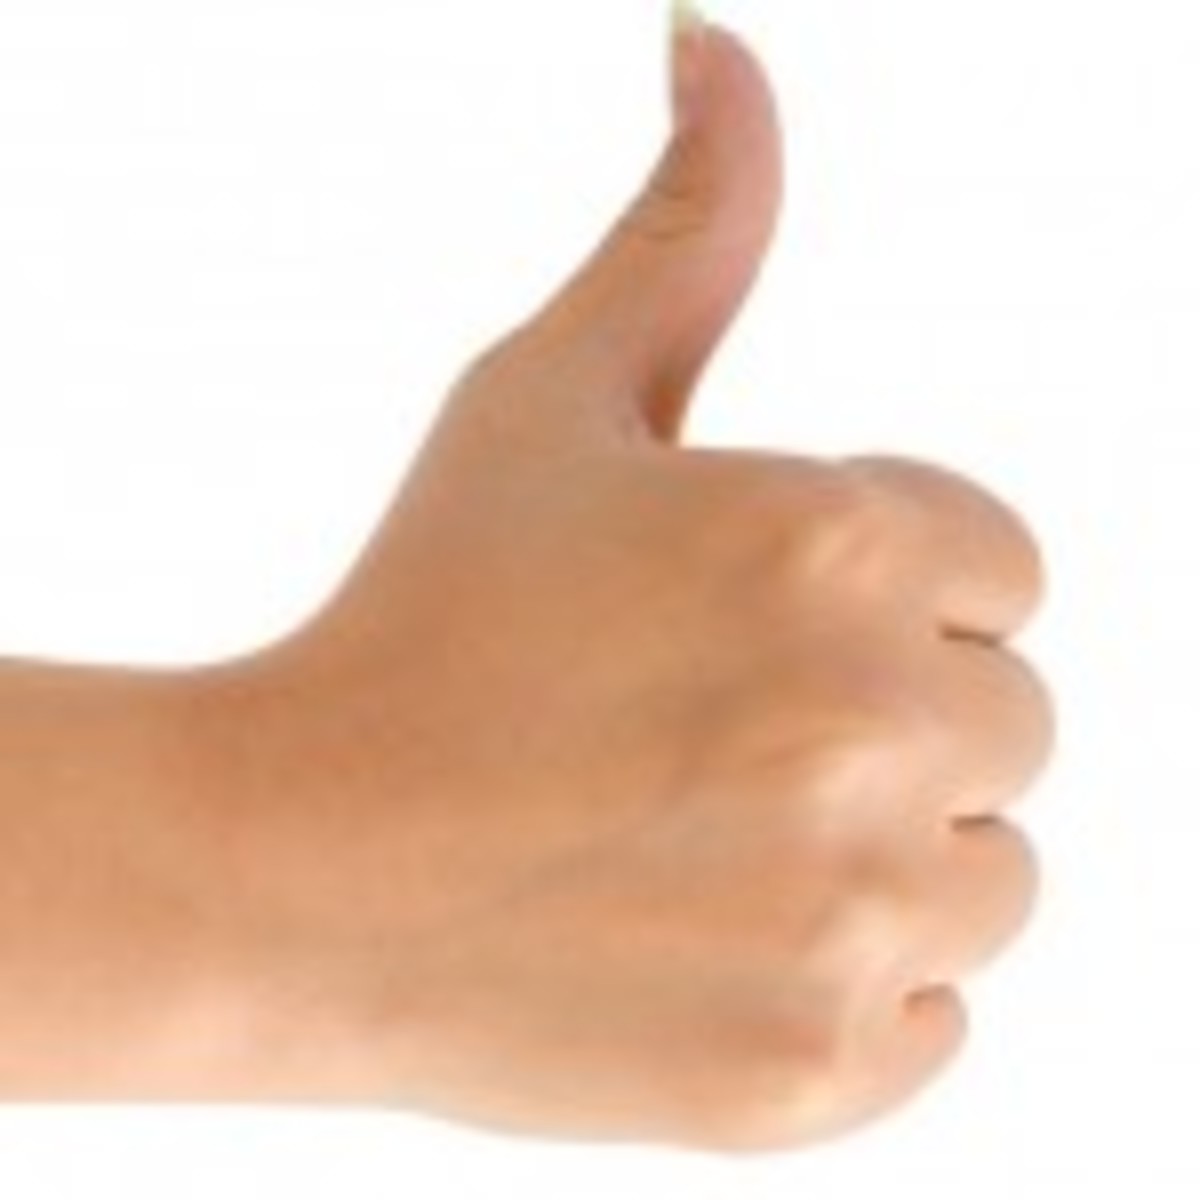 thumbs up cropped